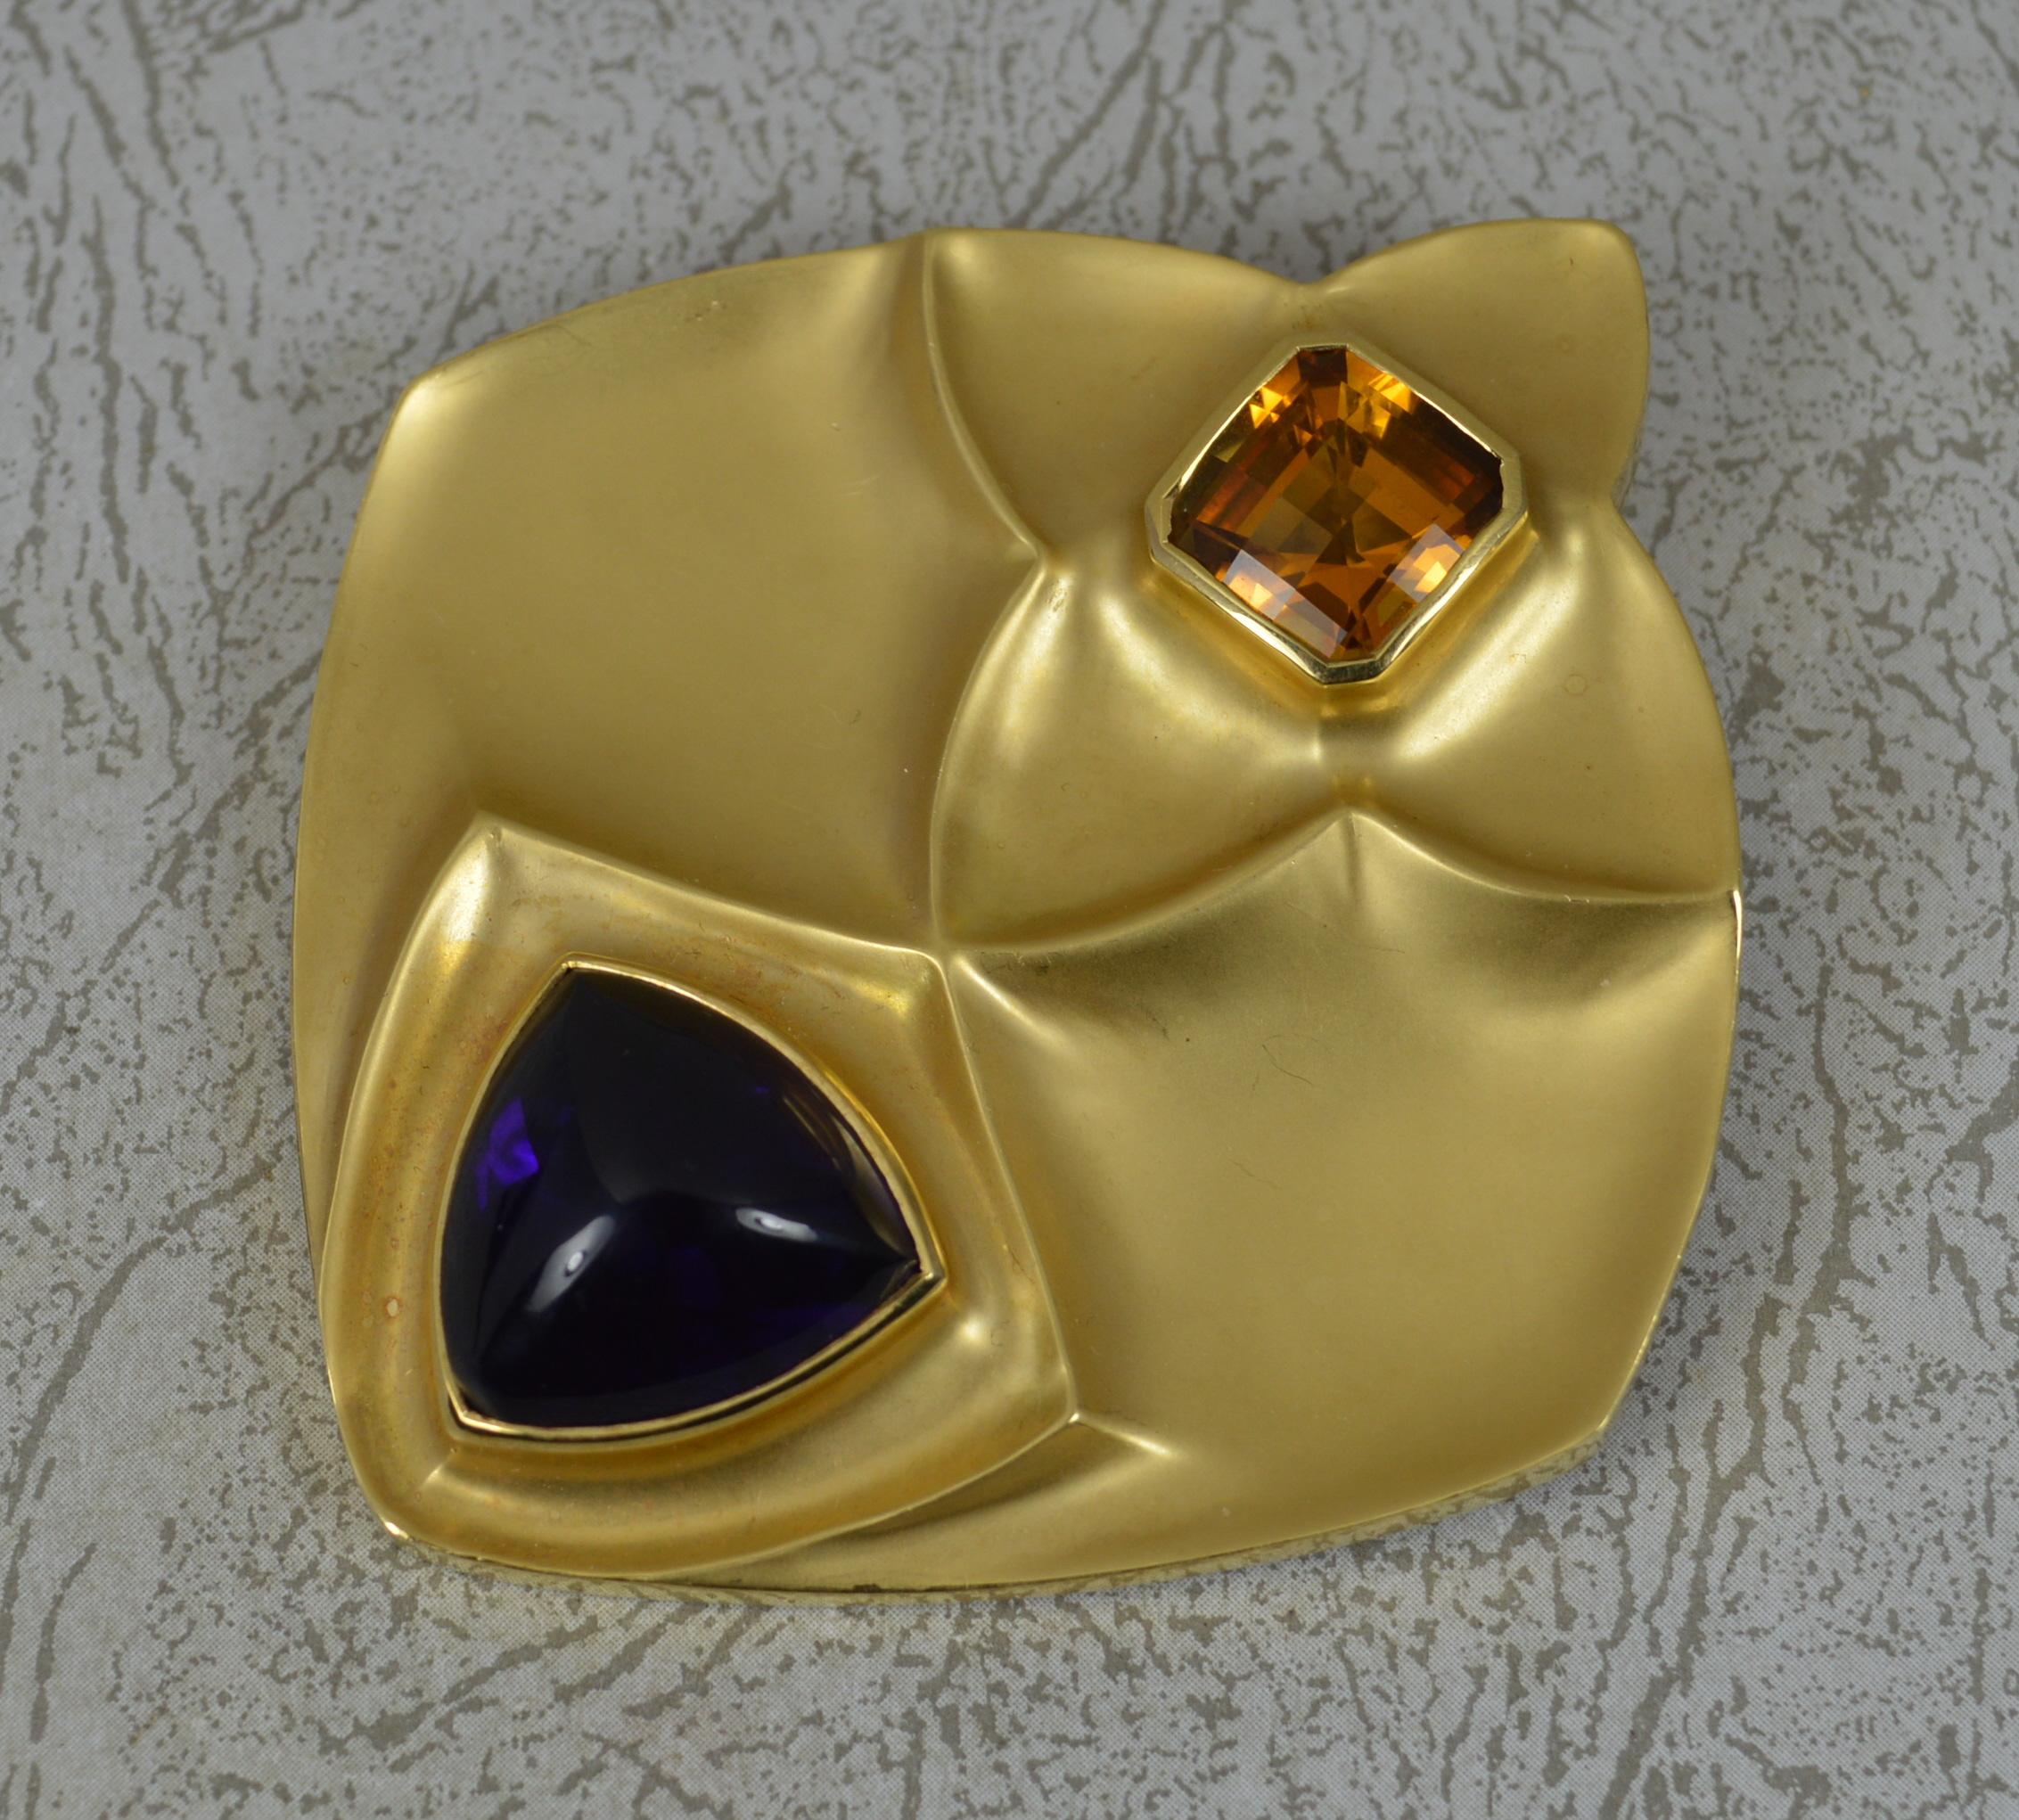 A stunning Boodles designer brooch.
Very heavy and solid example in 18 carat yellow gold.
Designed with a trillion shaped amethyst cabochon to top and facet cut top citrine of square shape below. 
A fine, stylish shape with both polished and matte